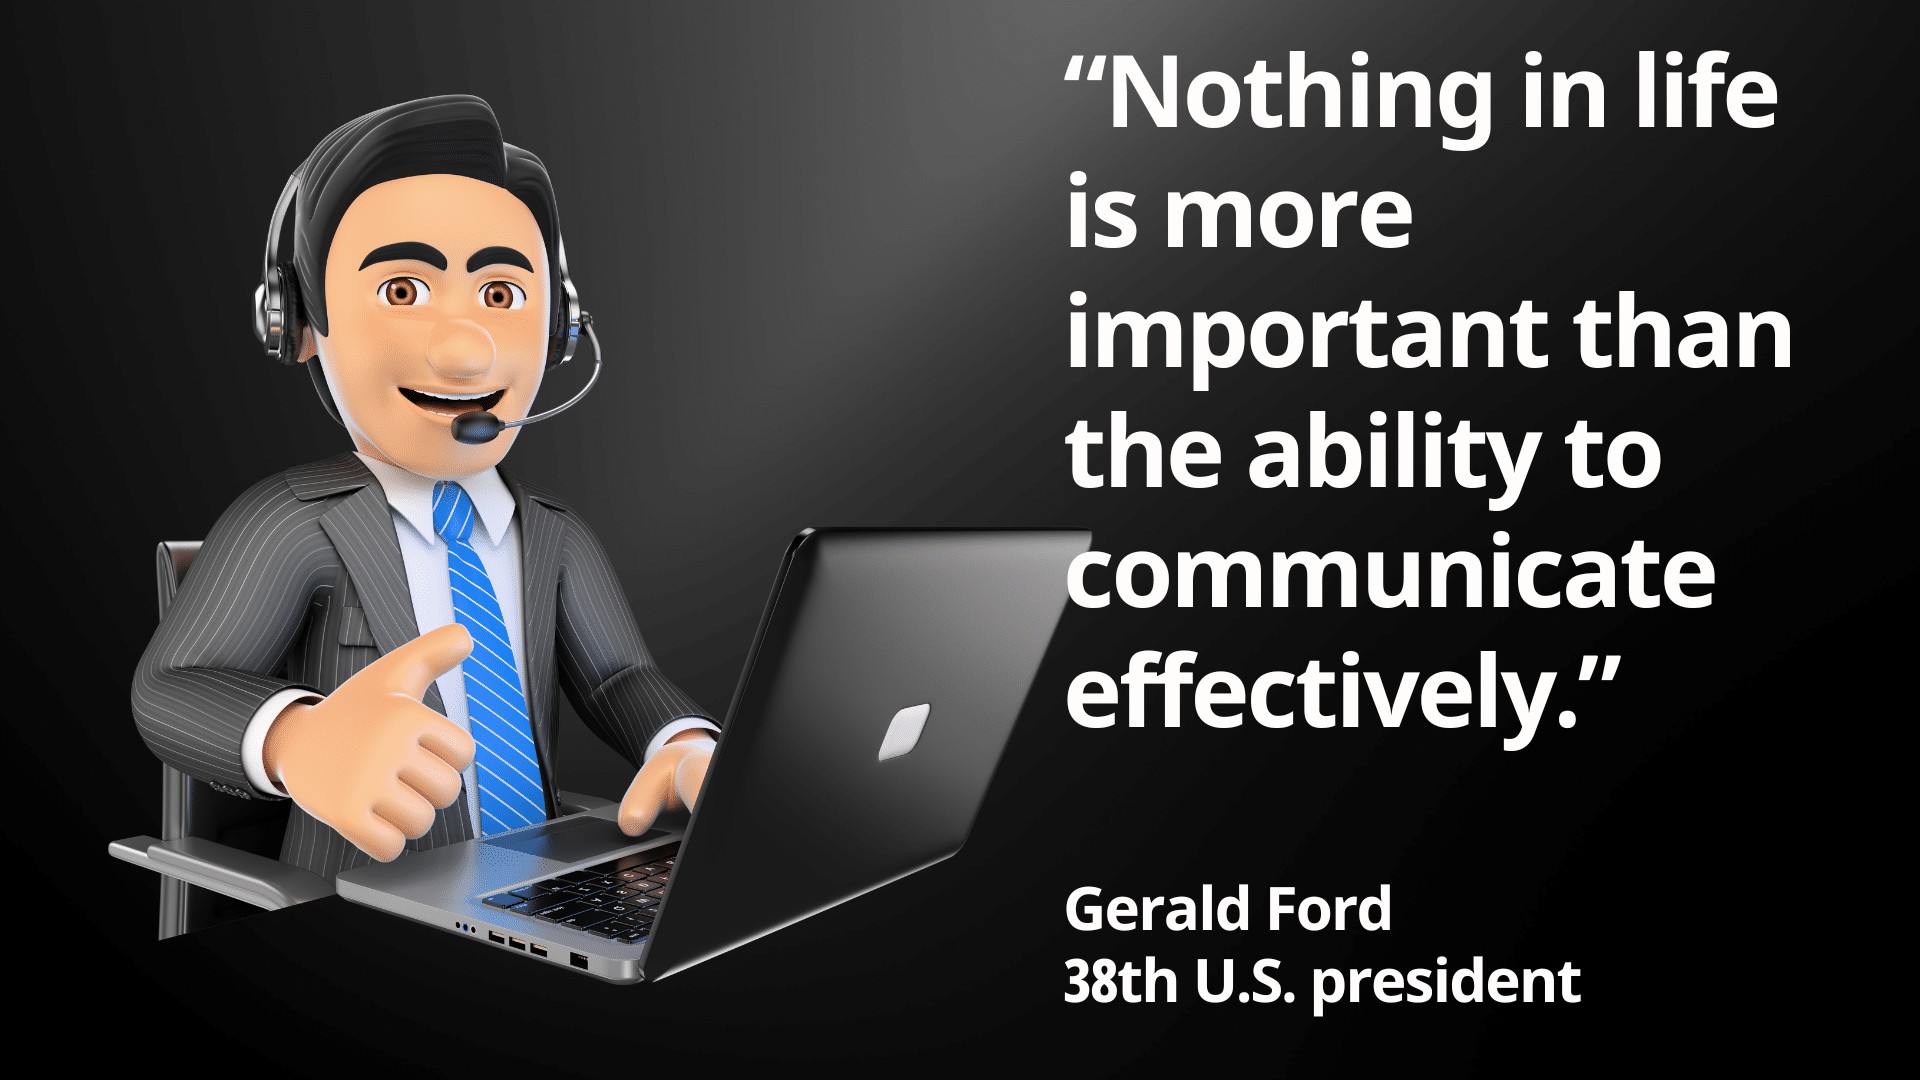 “Nothing in life is more important than the ability to communicate effectively.” Gerald Ford 38th U.S. president